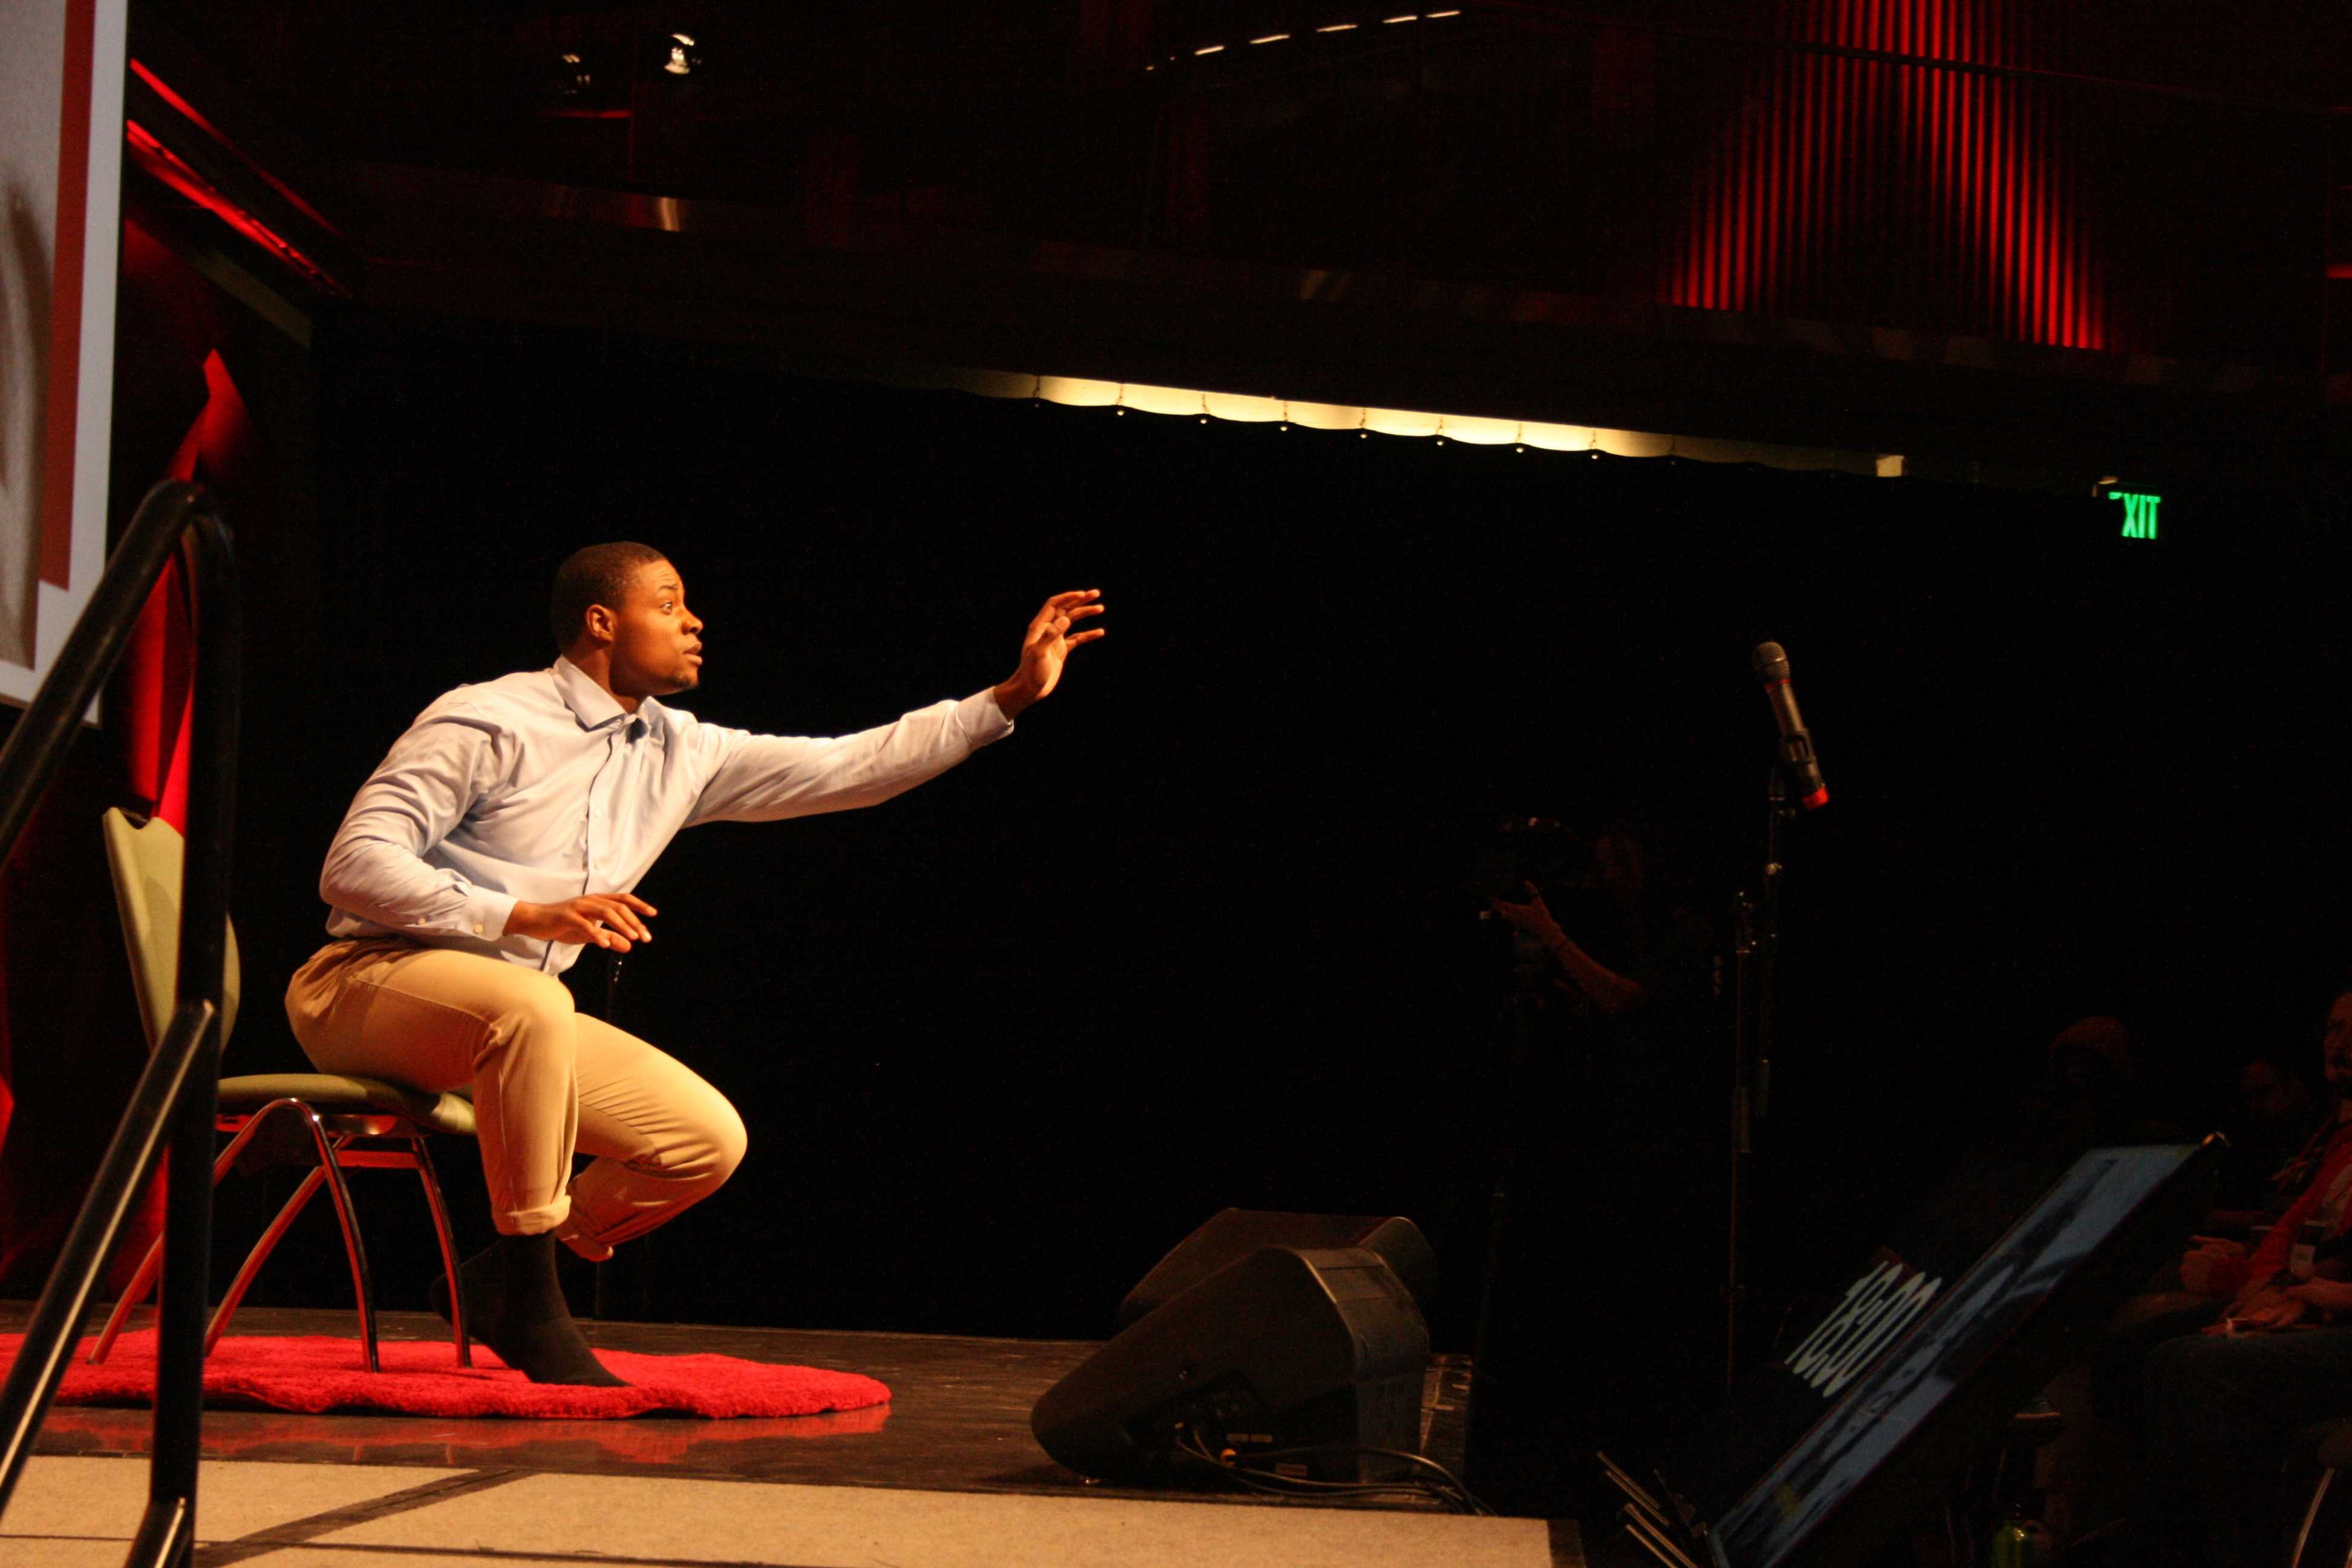 Young man sits on stage with an outstretched arm.